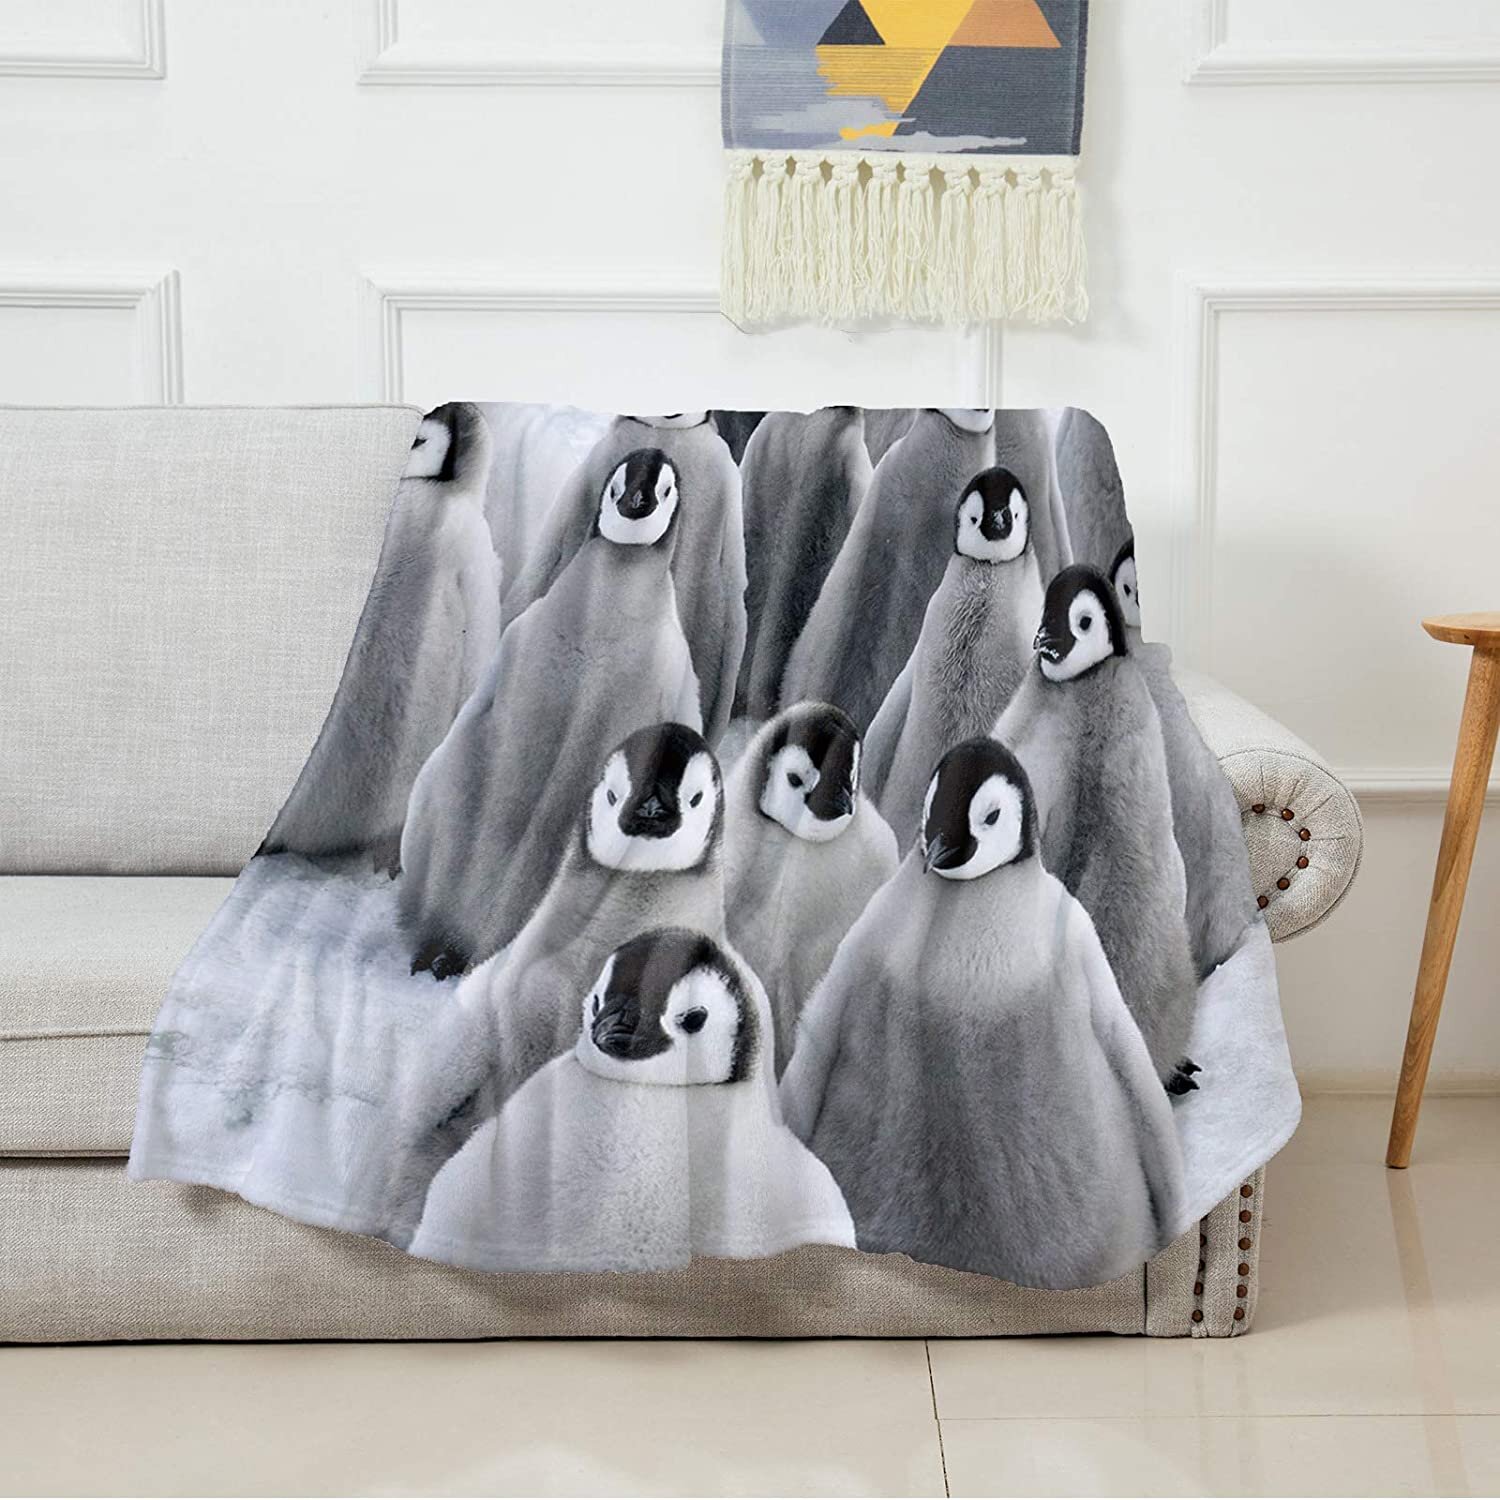 Cute Penguin Black and White Flannel Reversible Sherpa Throw Blanket Fuzzy and Soft Fleece Bed Blanket 